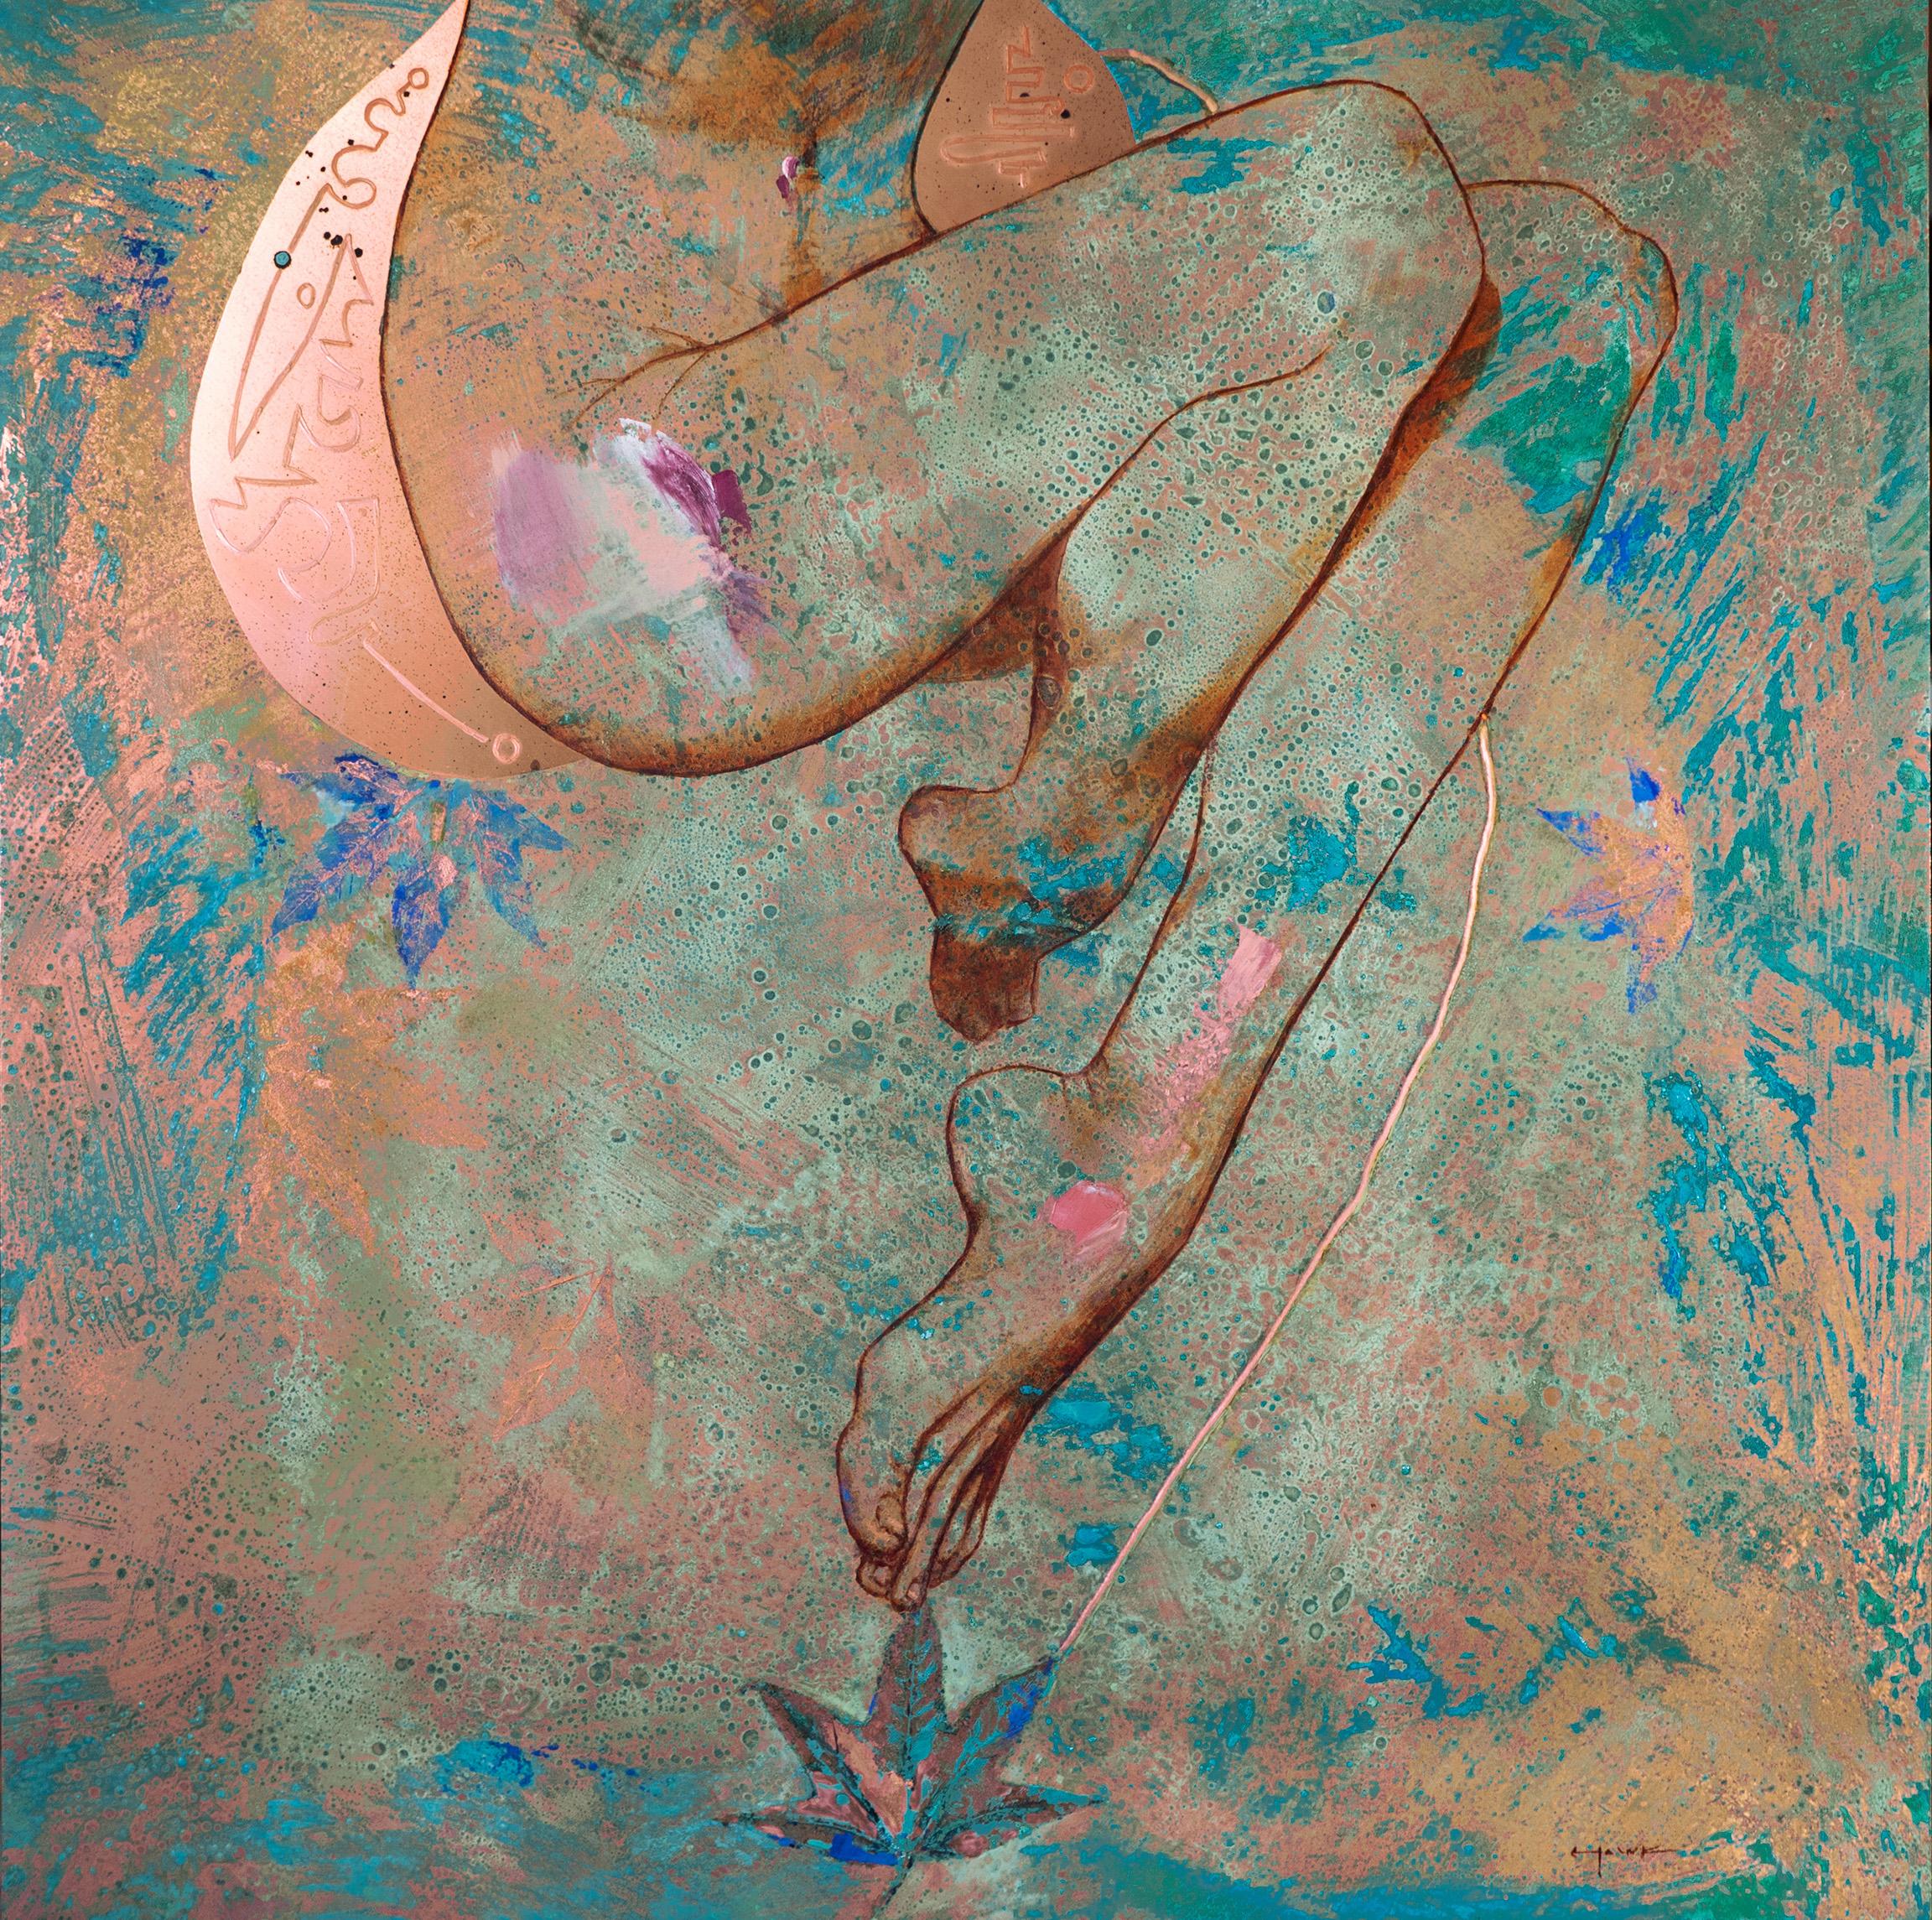 Richard Hawk Nude Painting - "Equilibrium" Oil painting on Copper   Female Nude Abstract blue oxidized patina